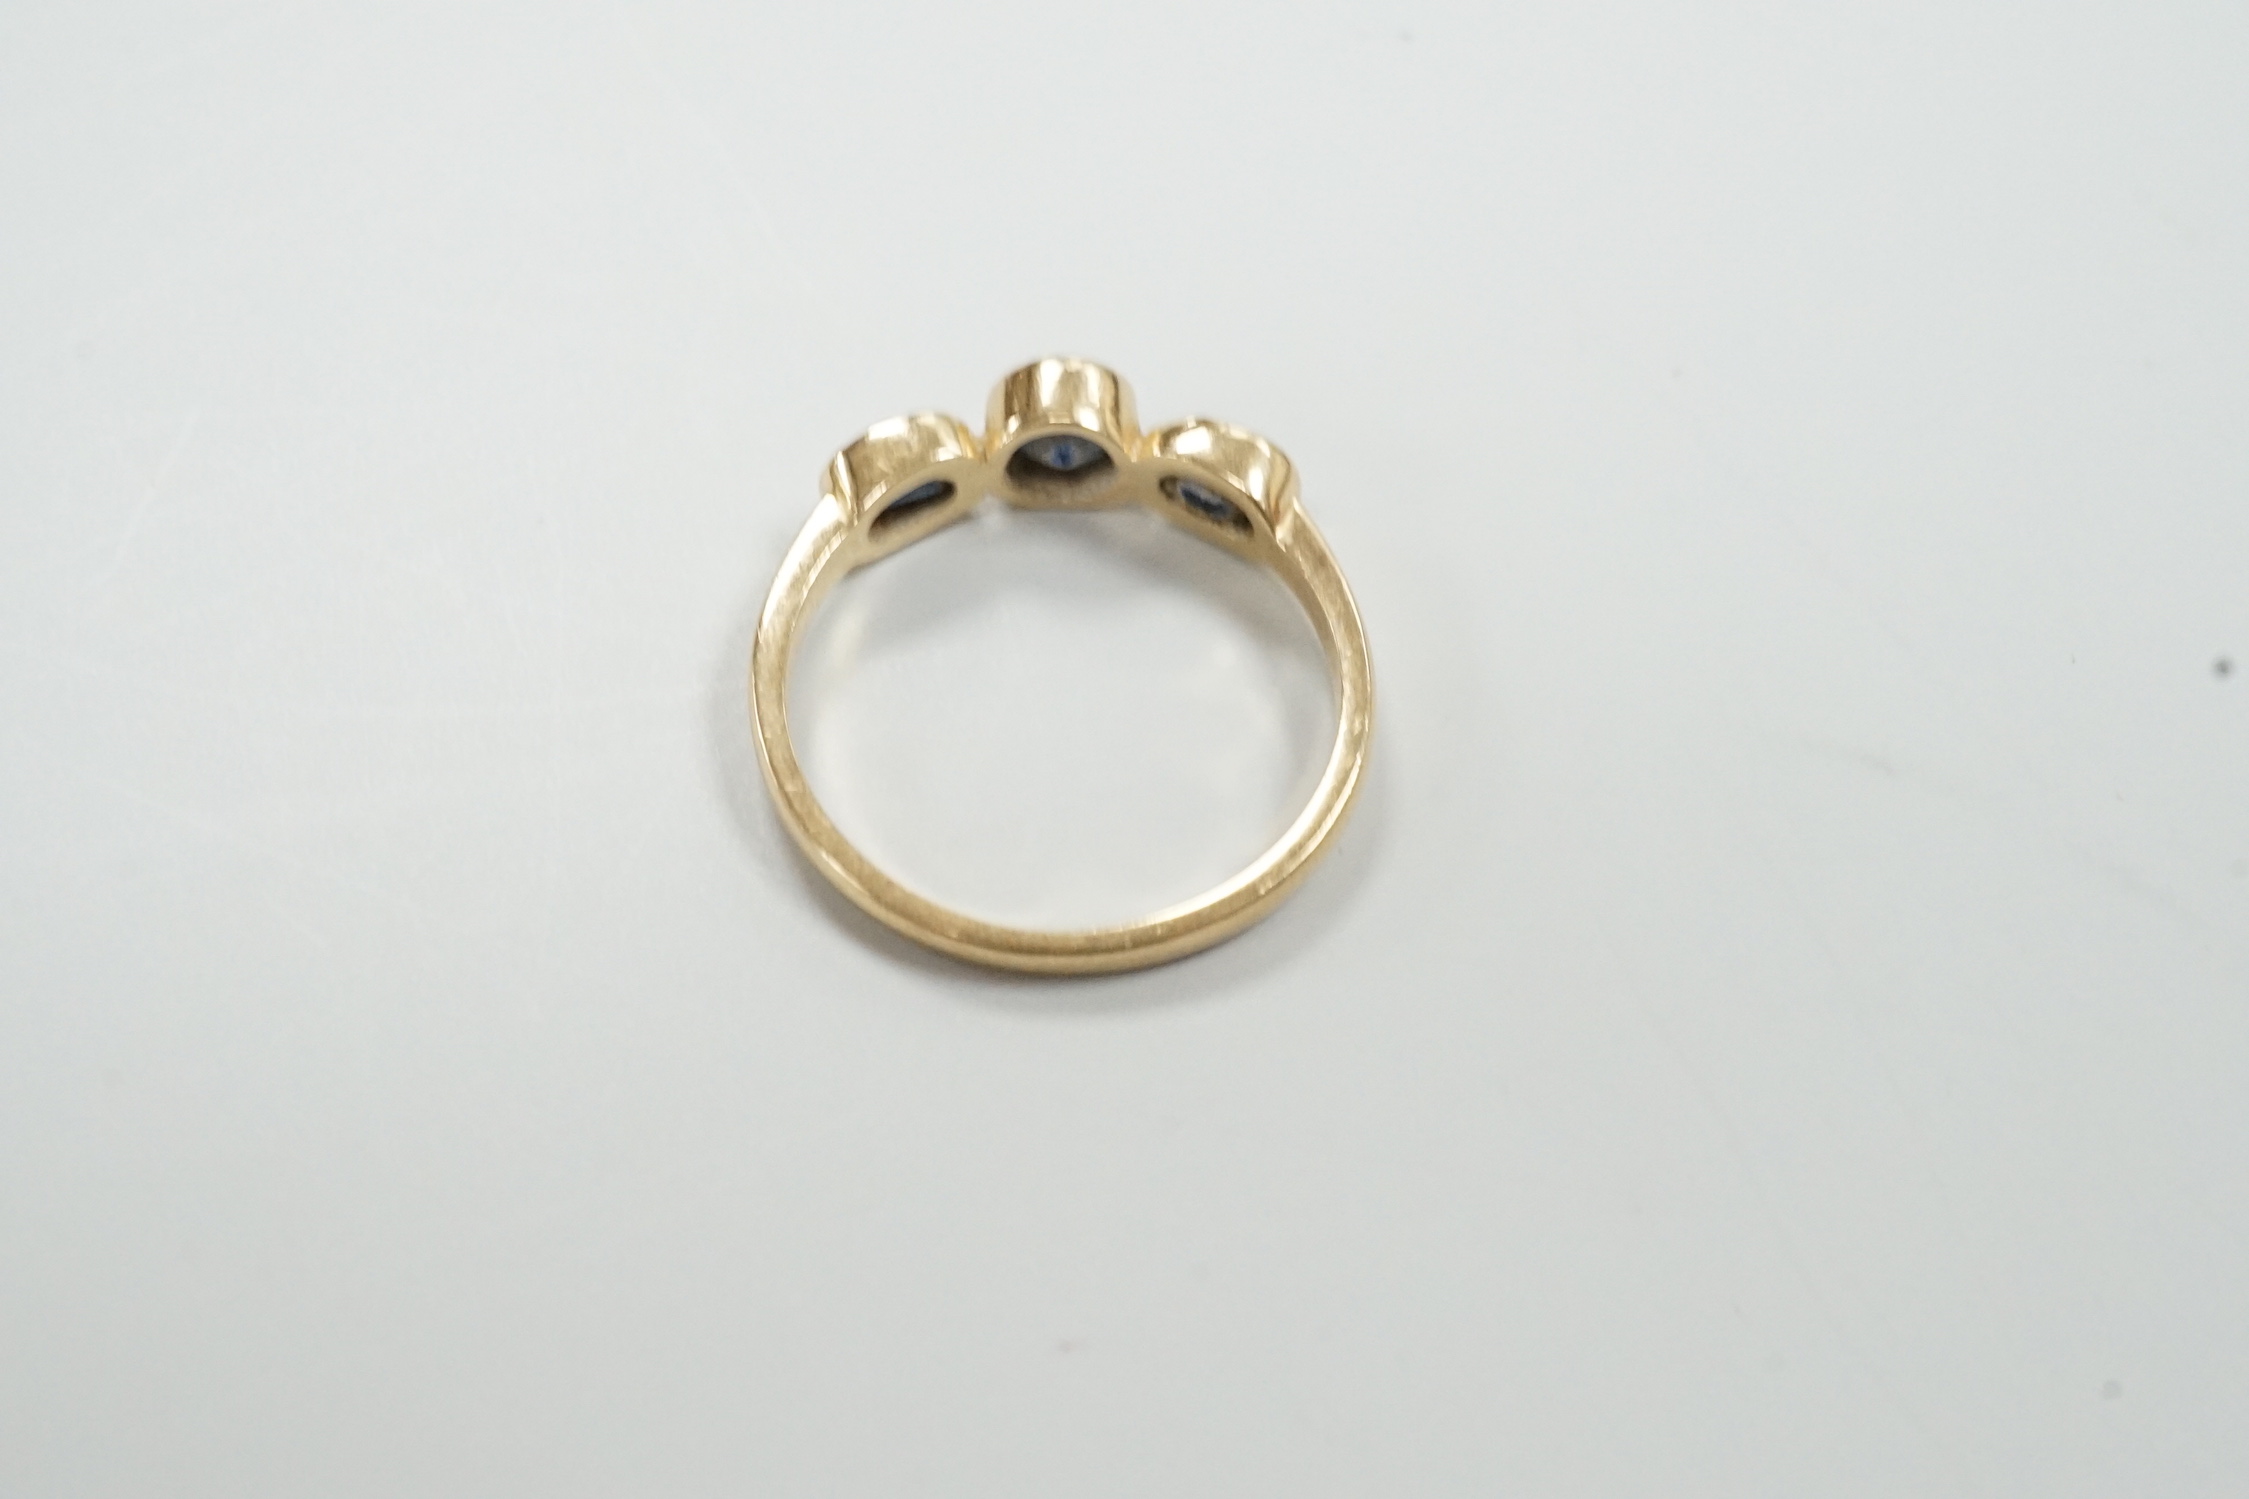 A modern 585 yellow metal and three stone sapphire set ring, size O, gross weight 2.4 grams.